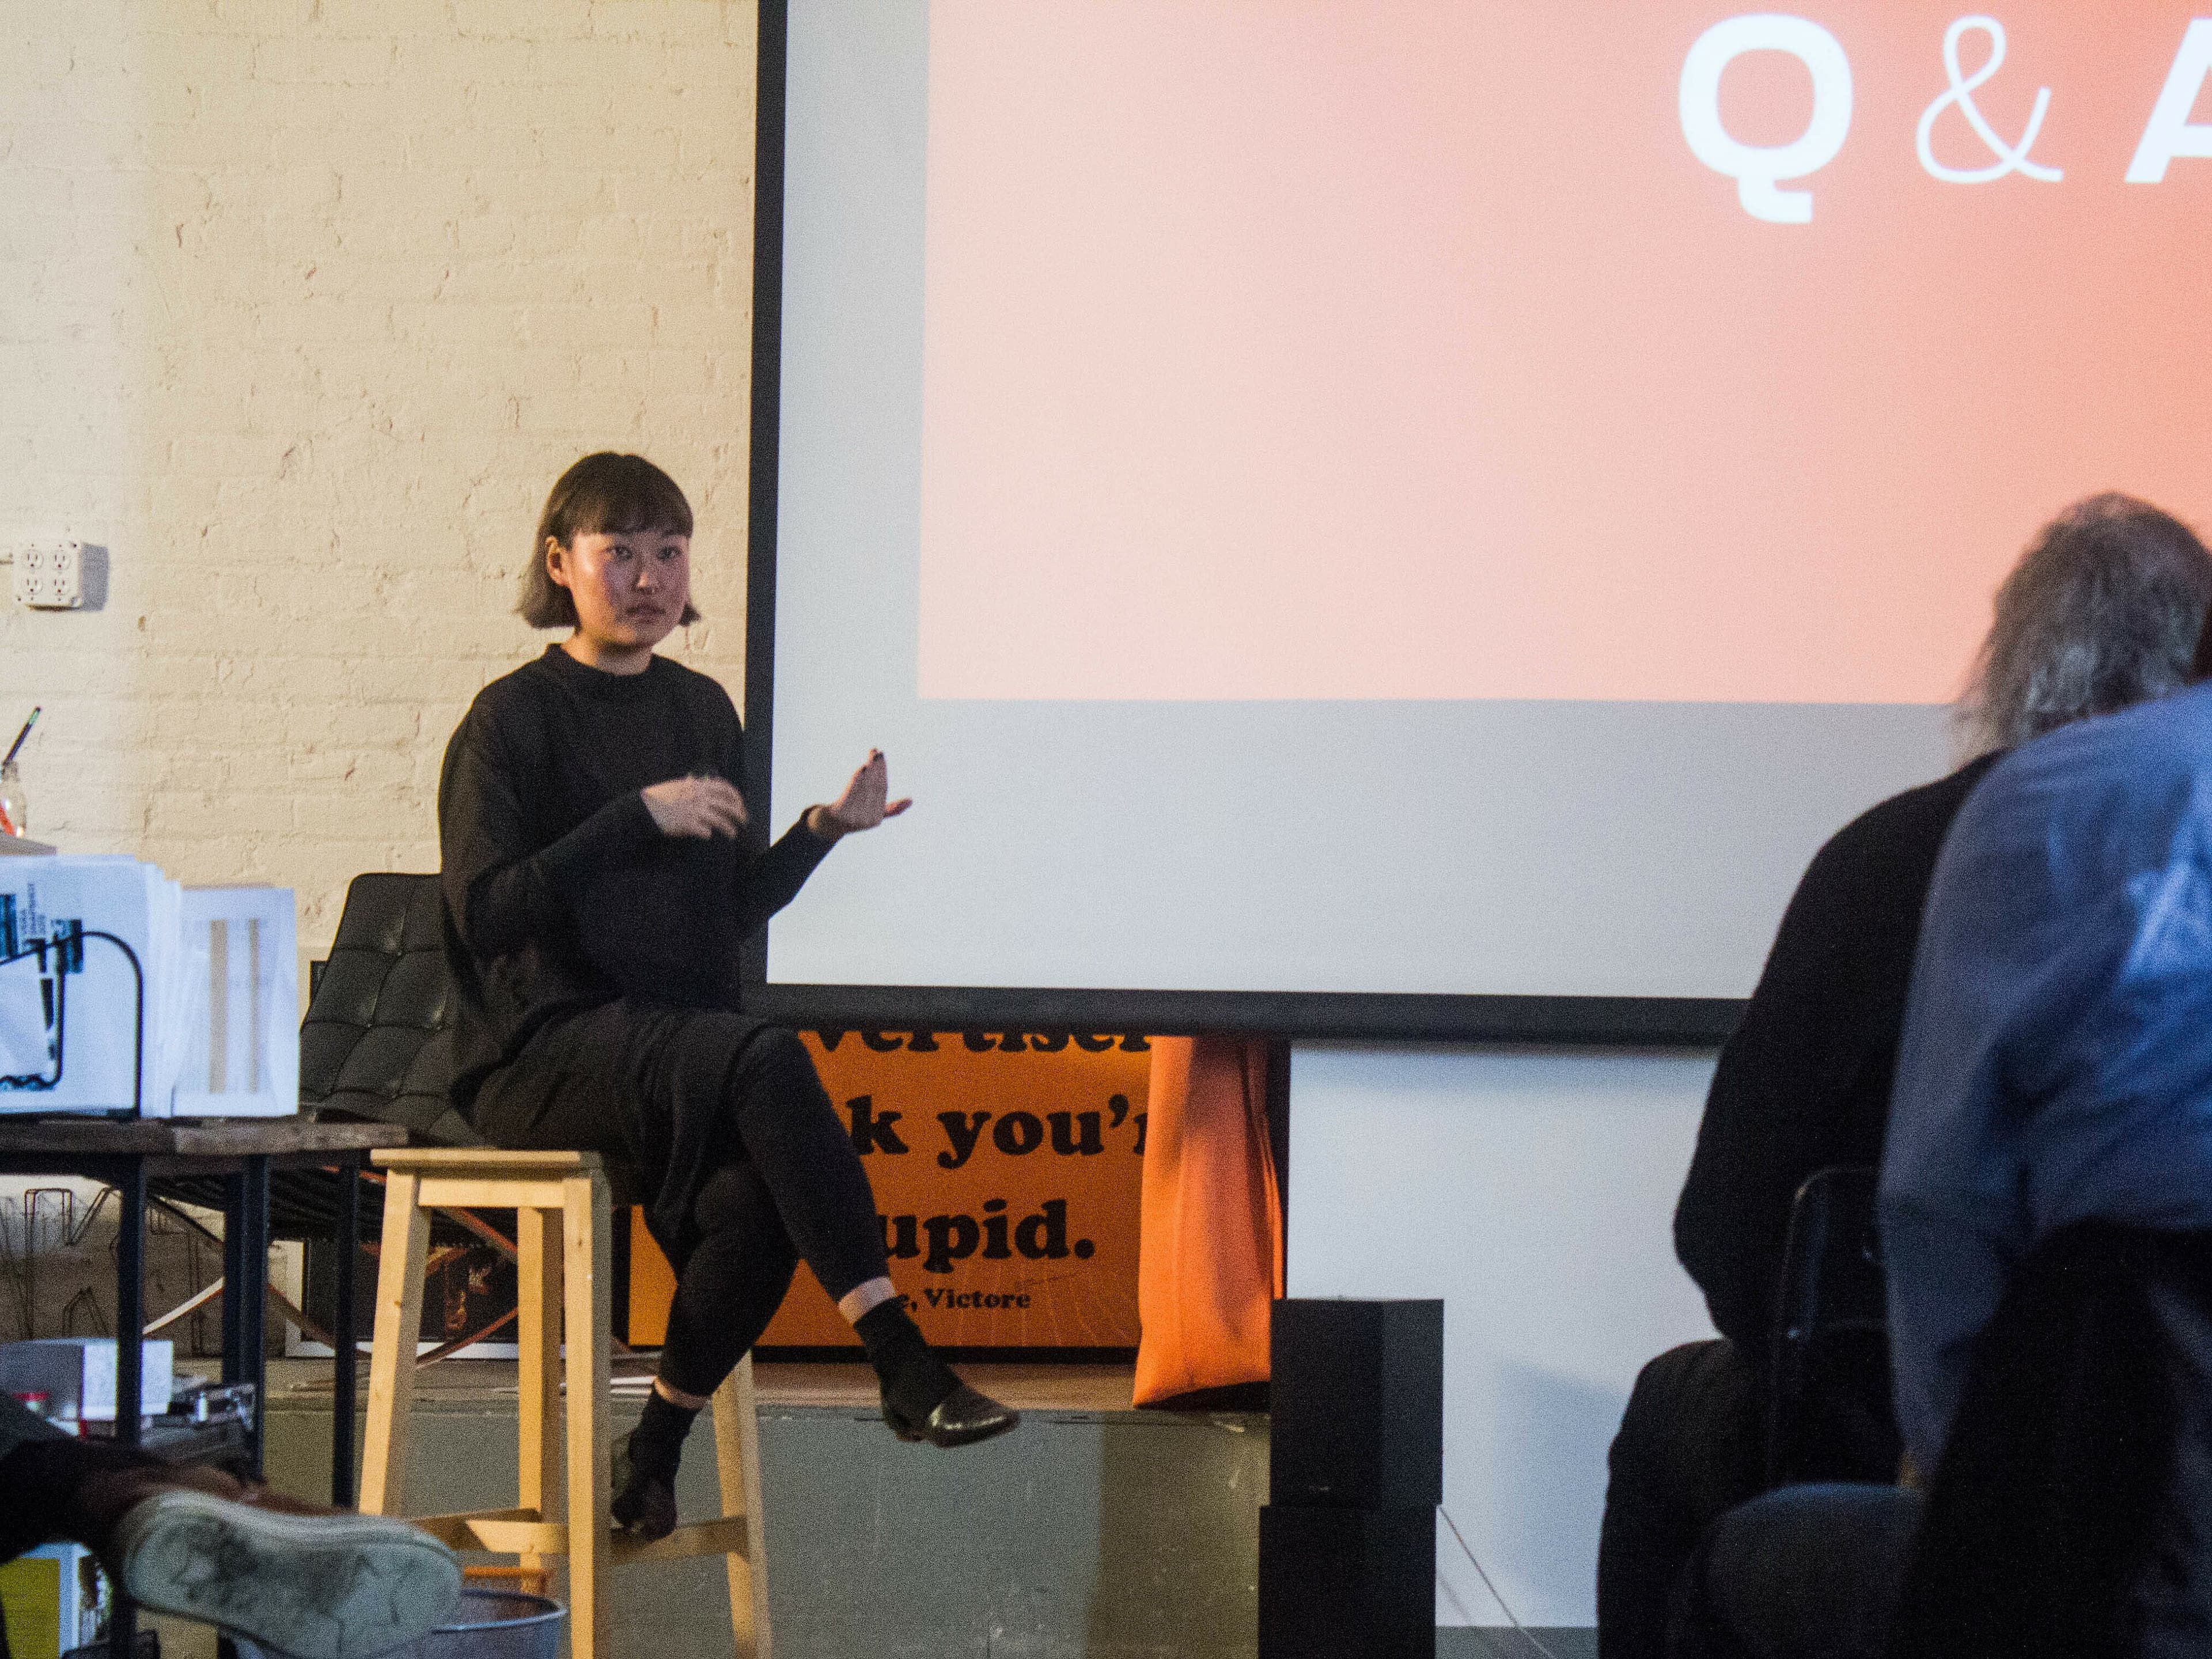 A person sits on a stool giving a presentation in front of a large screen displaying "Q & A." The setup suggests a casual, creative environment with a 3D printer visible on the left side. The audience is attentively listening.